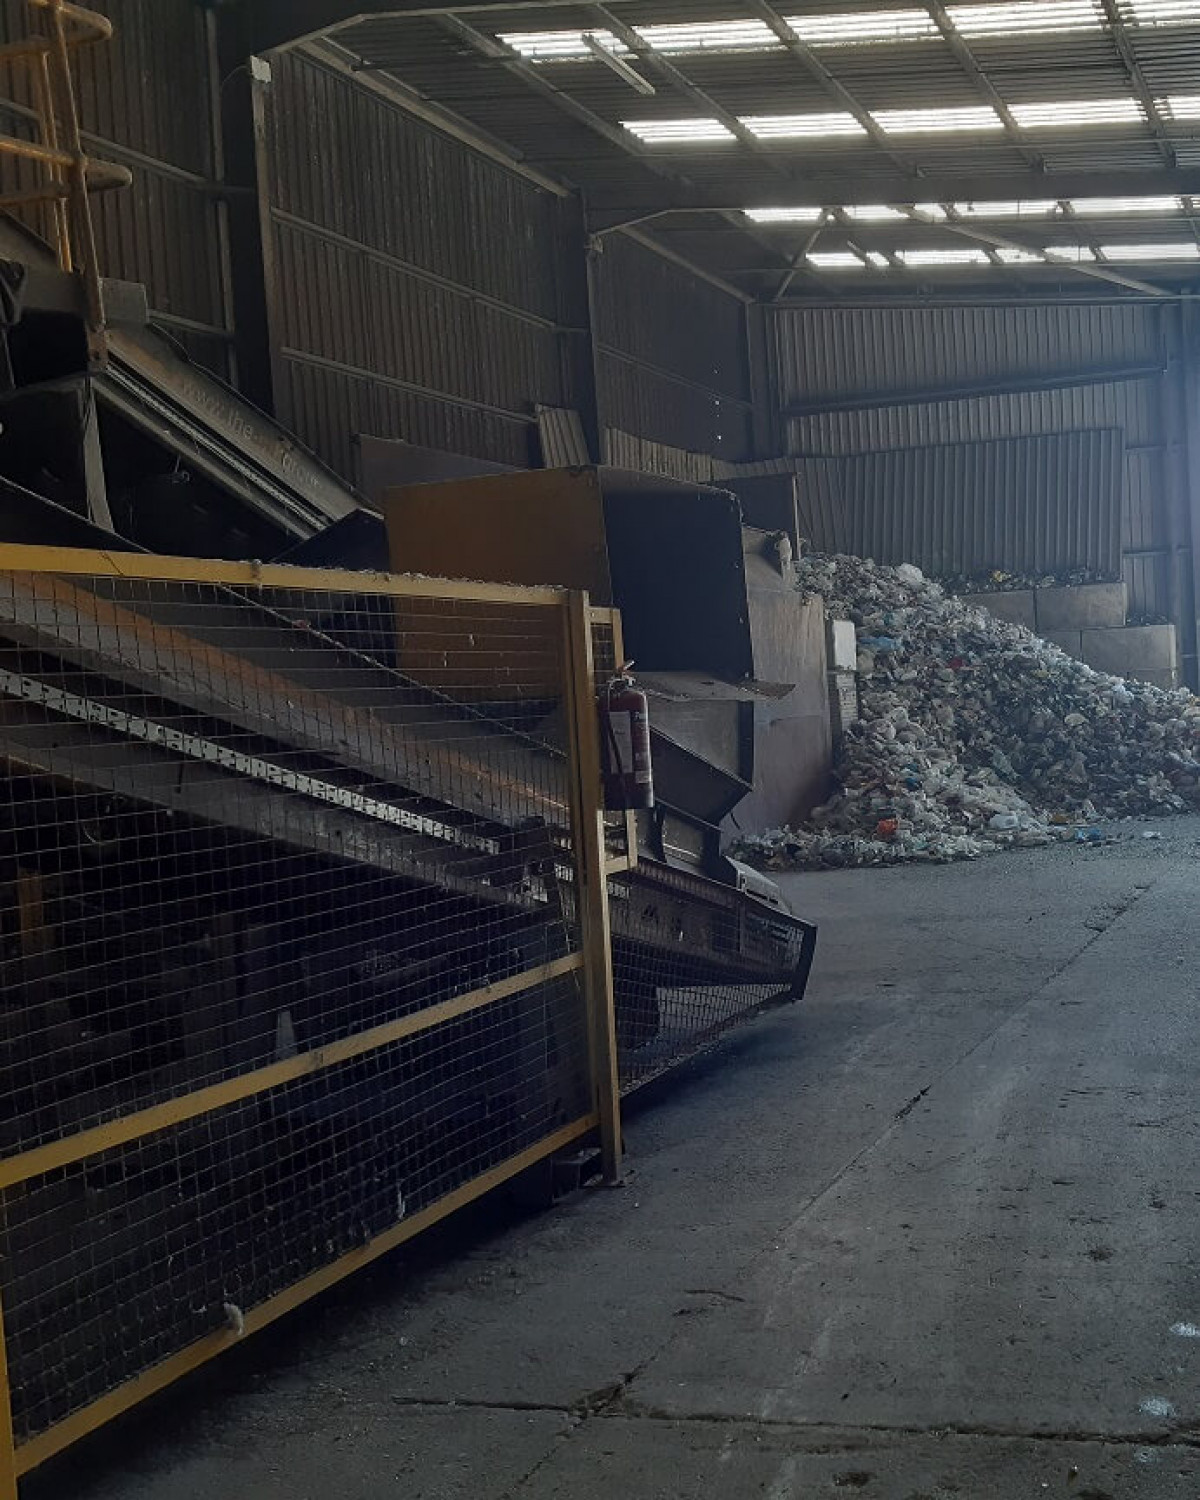 Raw Mixed Recycling Ready To Go Through Mechanical Sorting (On Left)